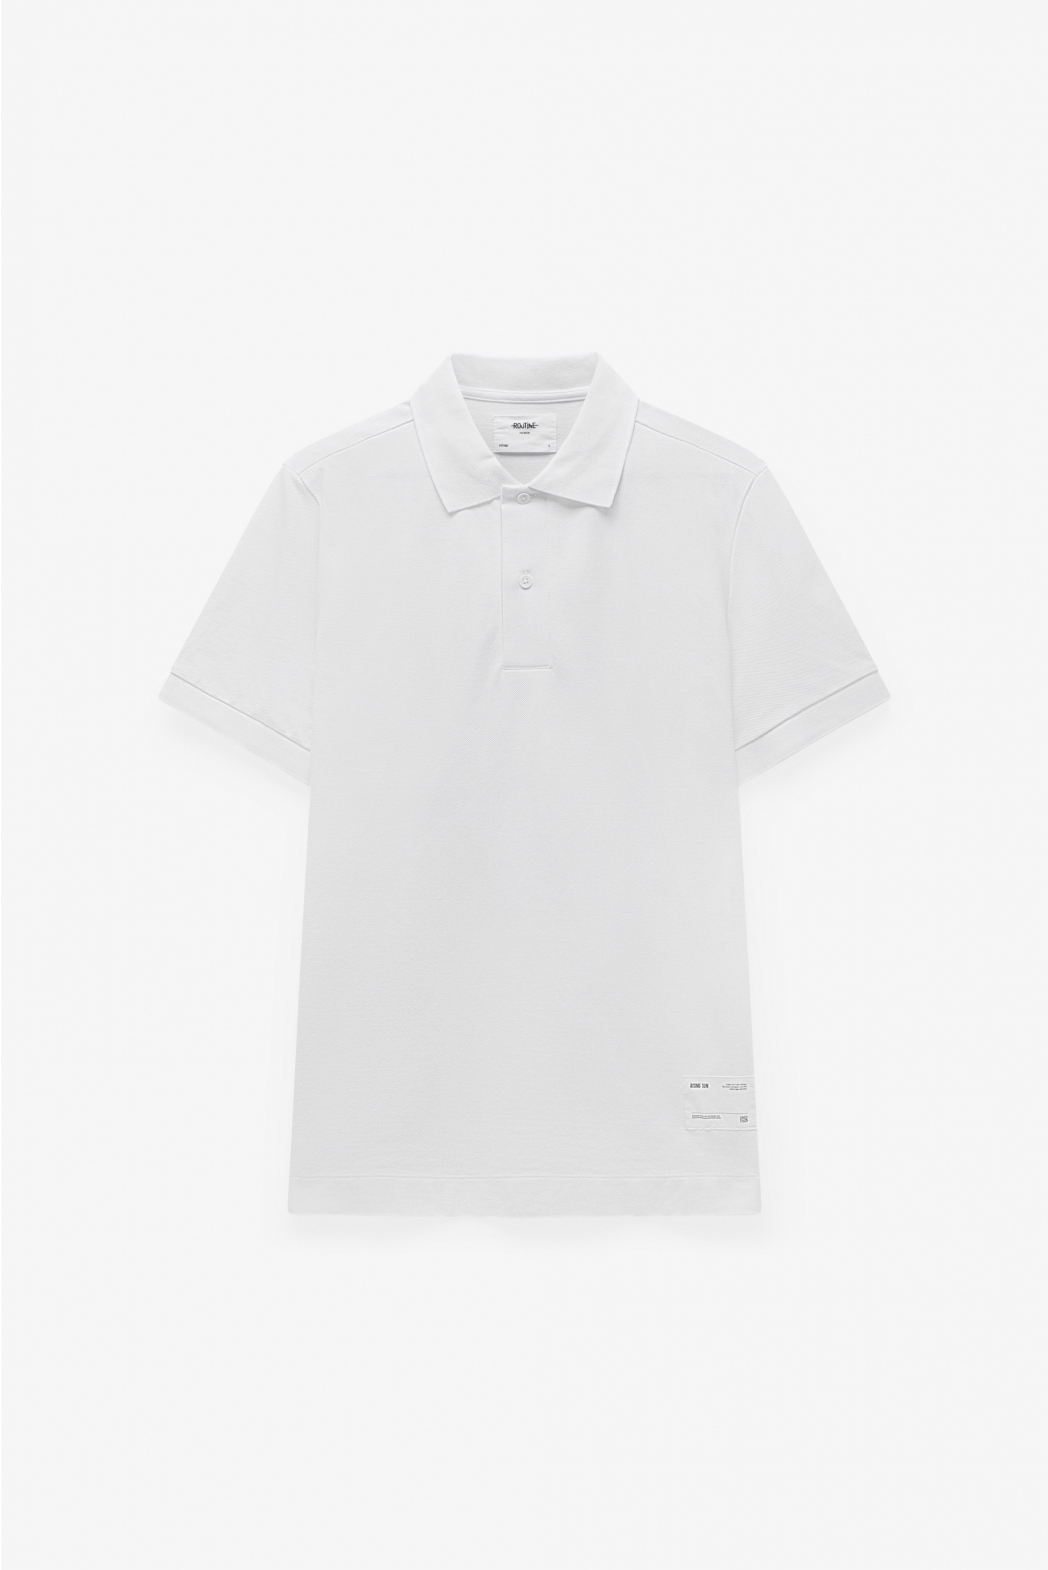 Áo Polo Nam ROUTINE Cổ Dệt Gân To Form Fitted - 10S23POL066 | LASTORE MENSWEAR